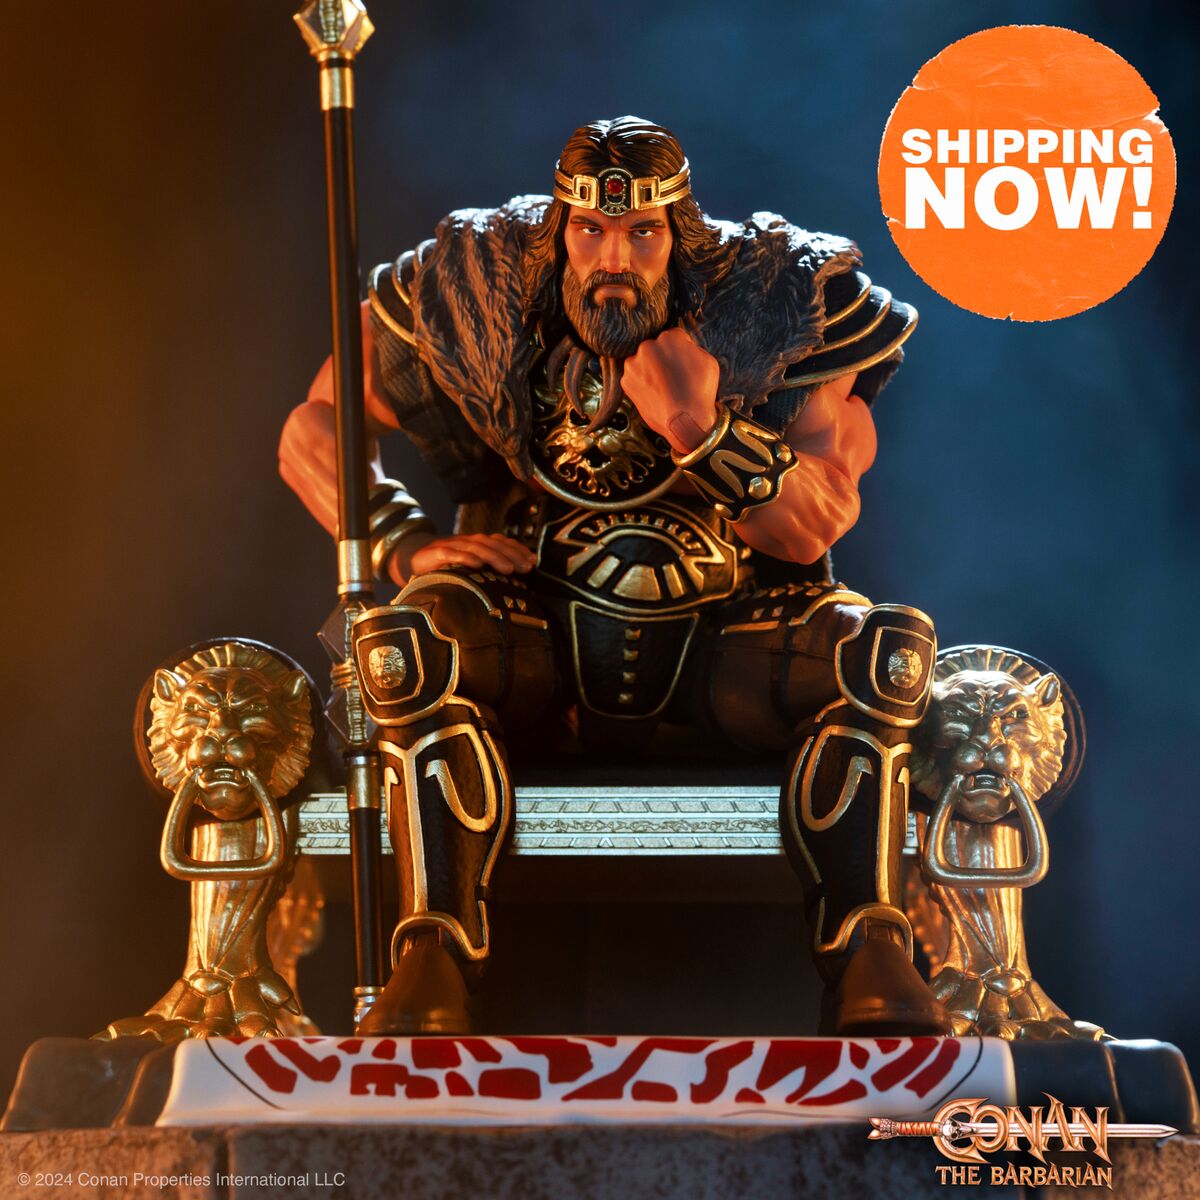 SHIPPING NOW! The made-to-order, 7” scale Conan The Barbarian ULTIMATES! Wave 4, featuring King Conan and The Throne of Aquilonia, is shipping now! Conan fans, tag us in your ULTIMATES! photos! #super7 #super7ultimates